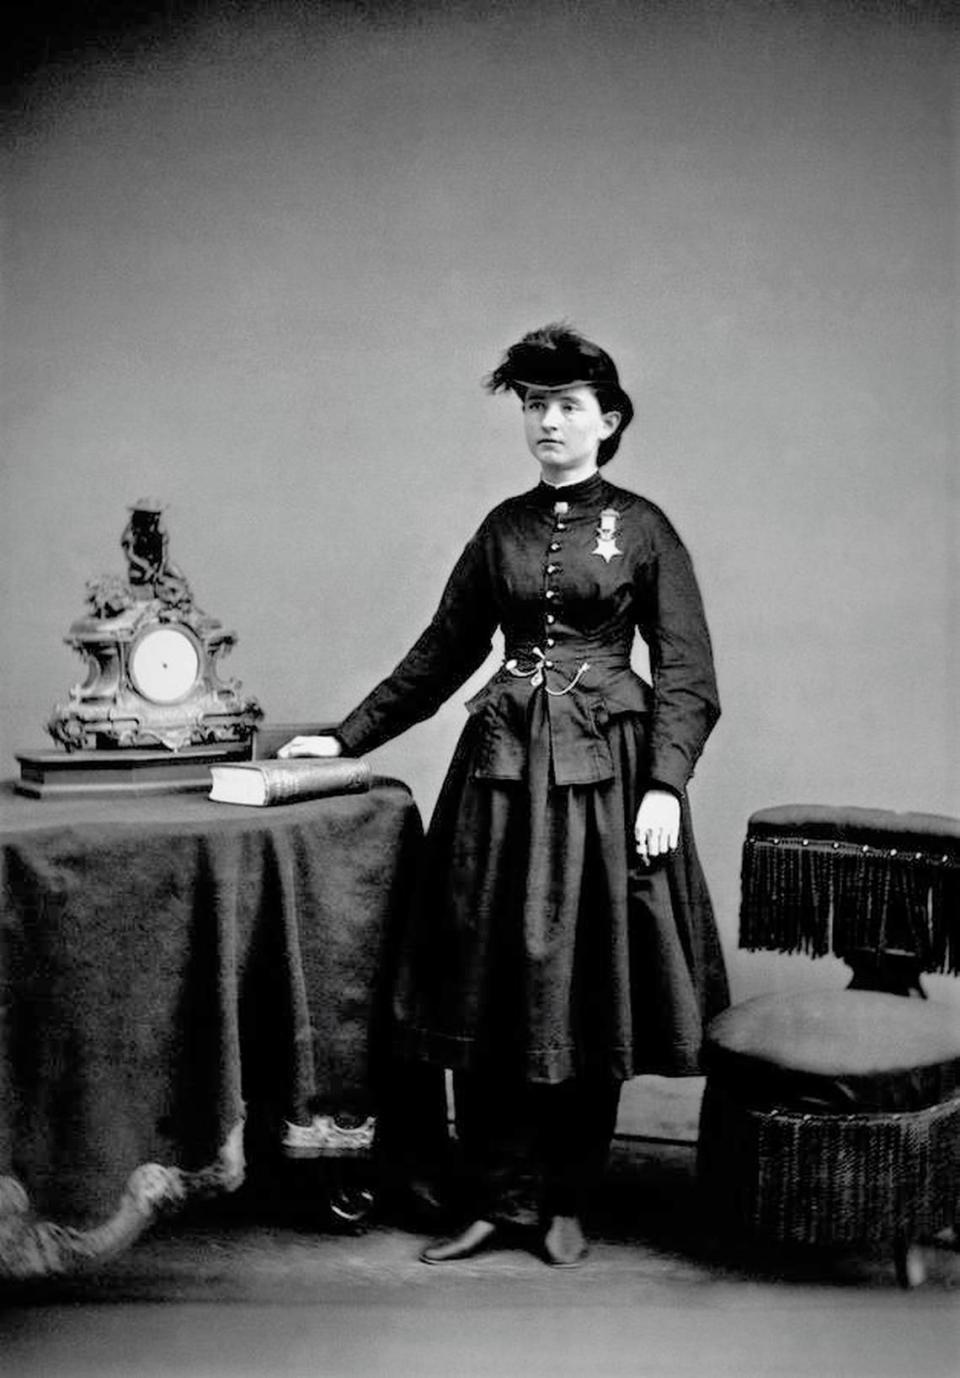 Dr. Mary Walker is pictured wearing her Medal of Honor in 1865.